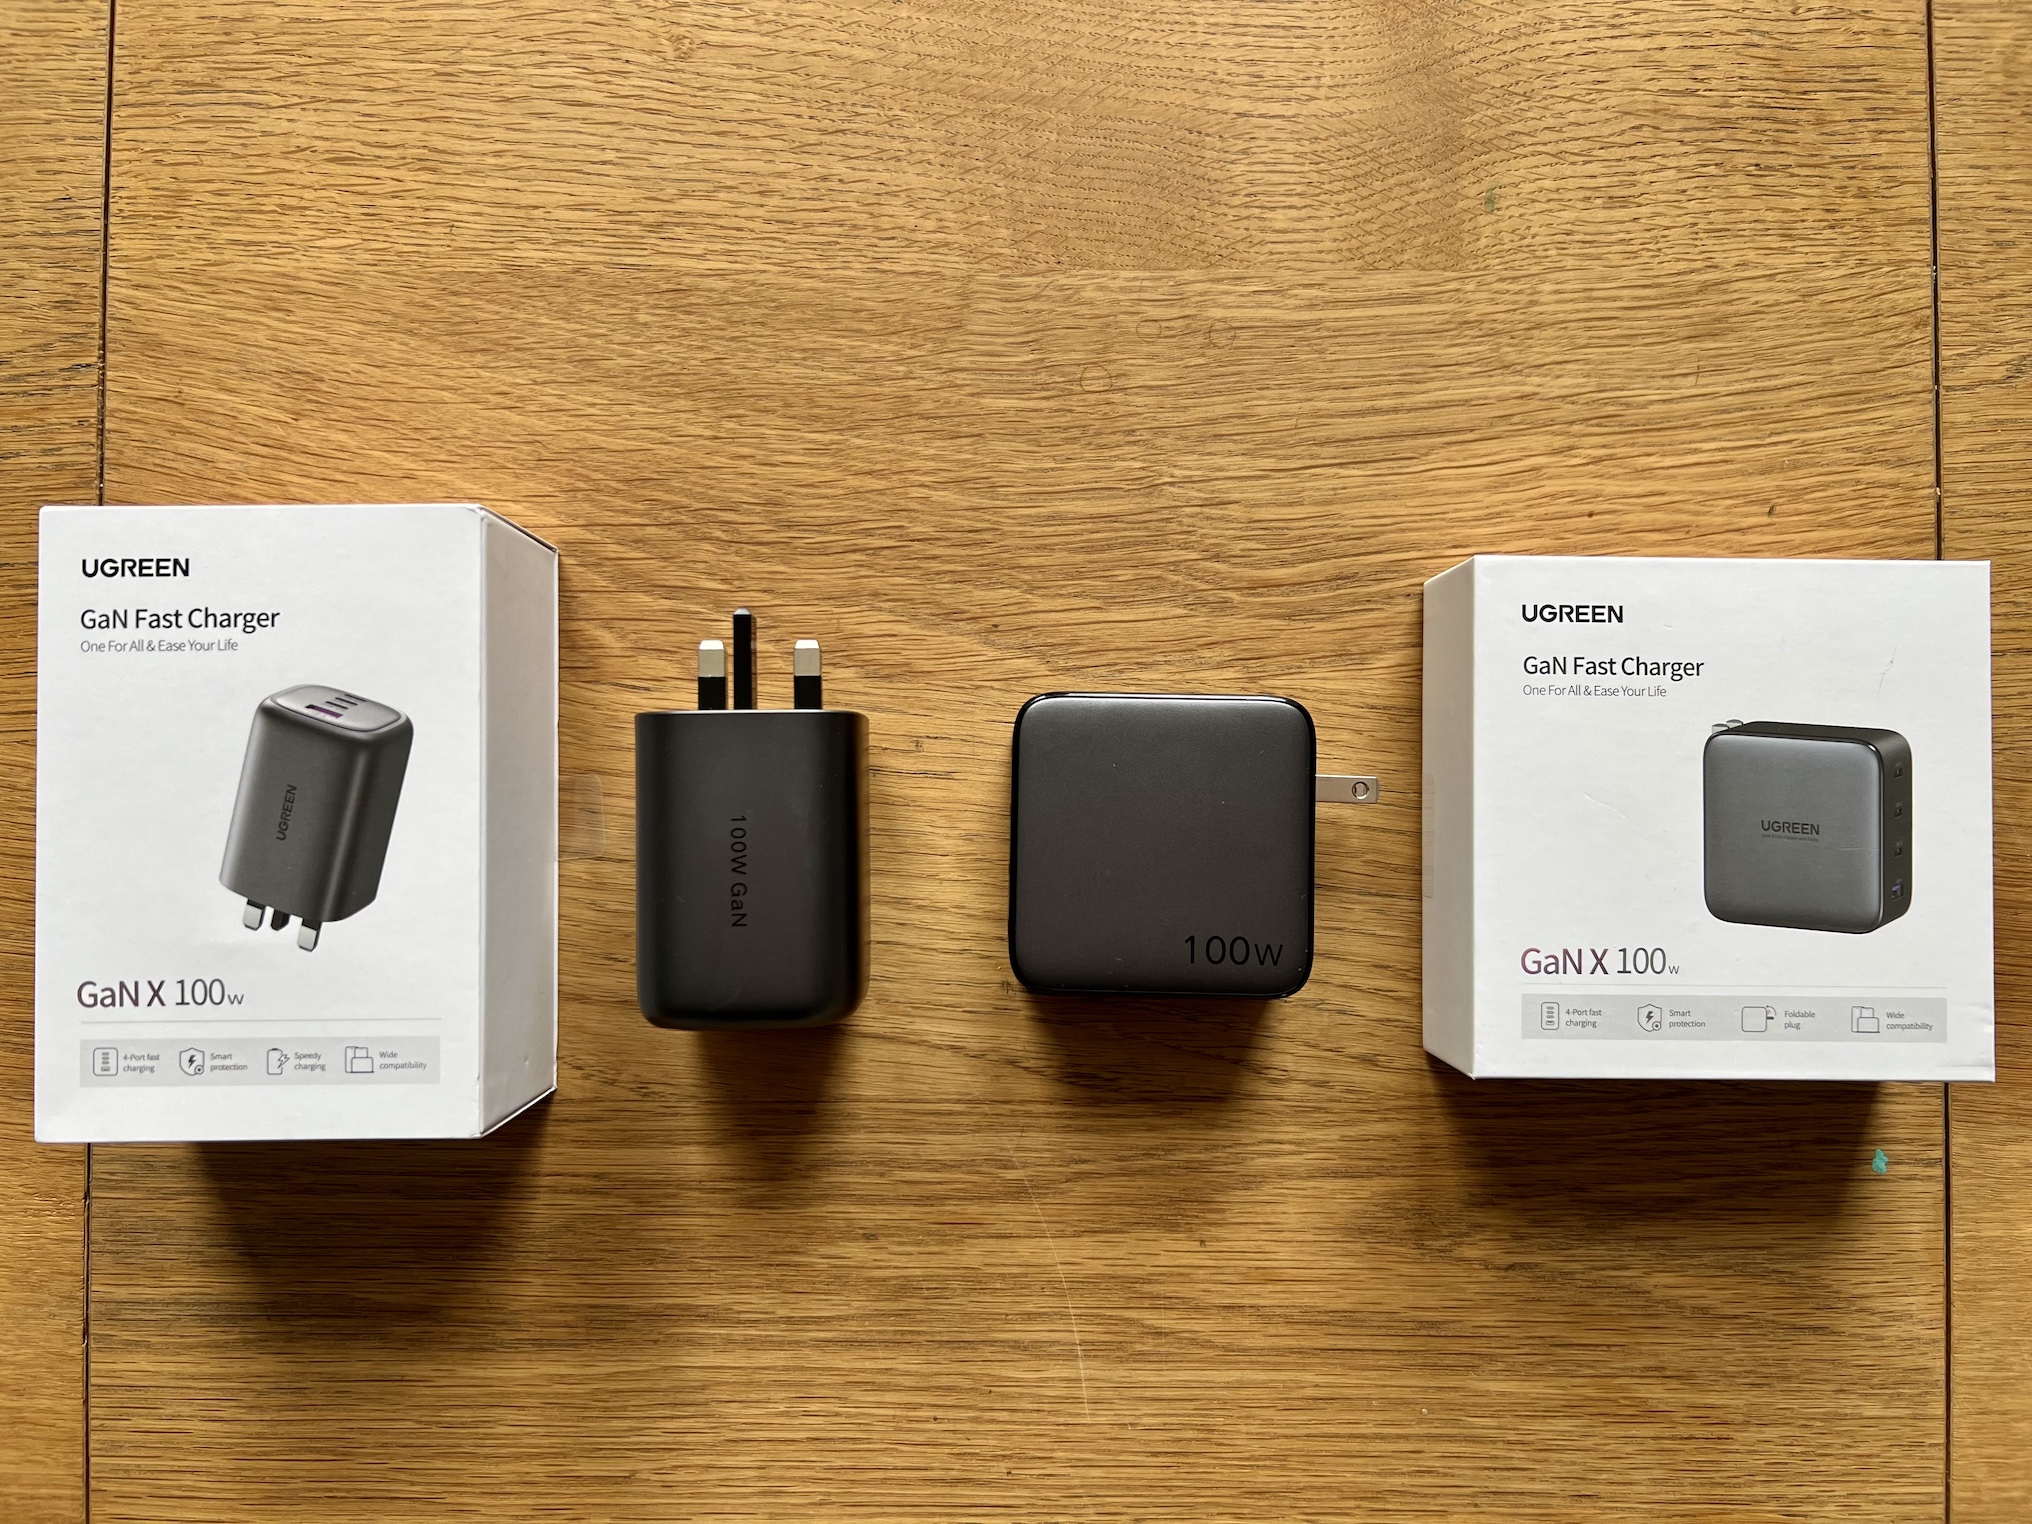 Ugreen's 4-Port GaN X Charger Offers Up to 100W Output in a Compact Design | MacRumors Forums